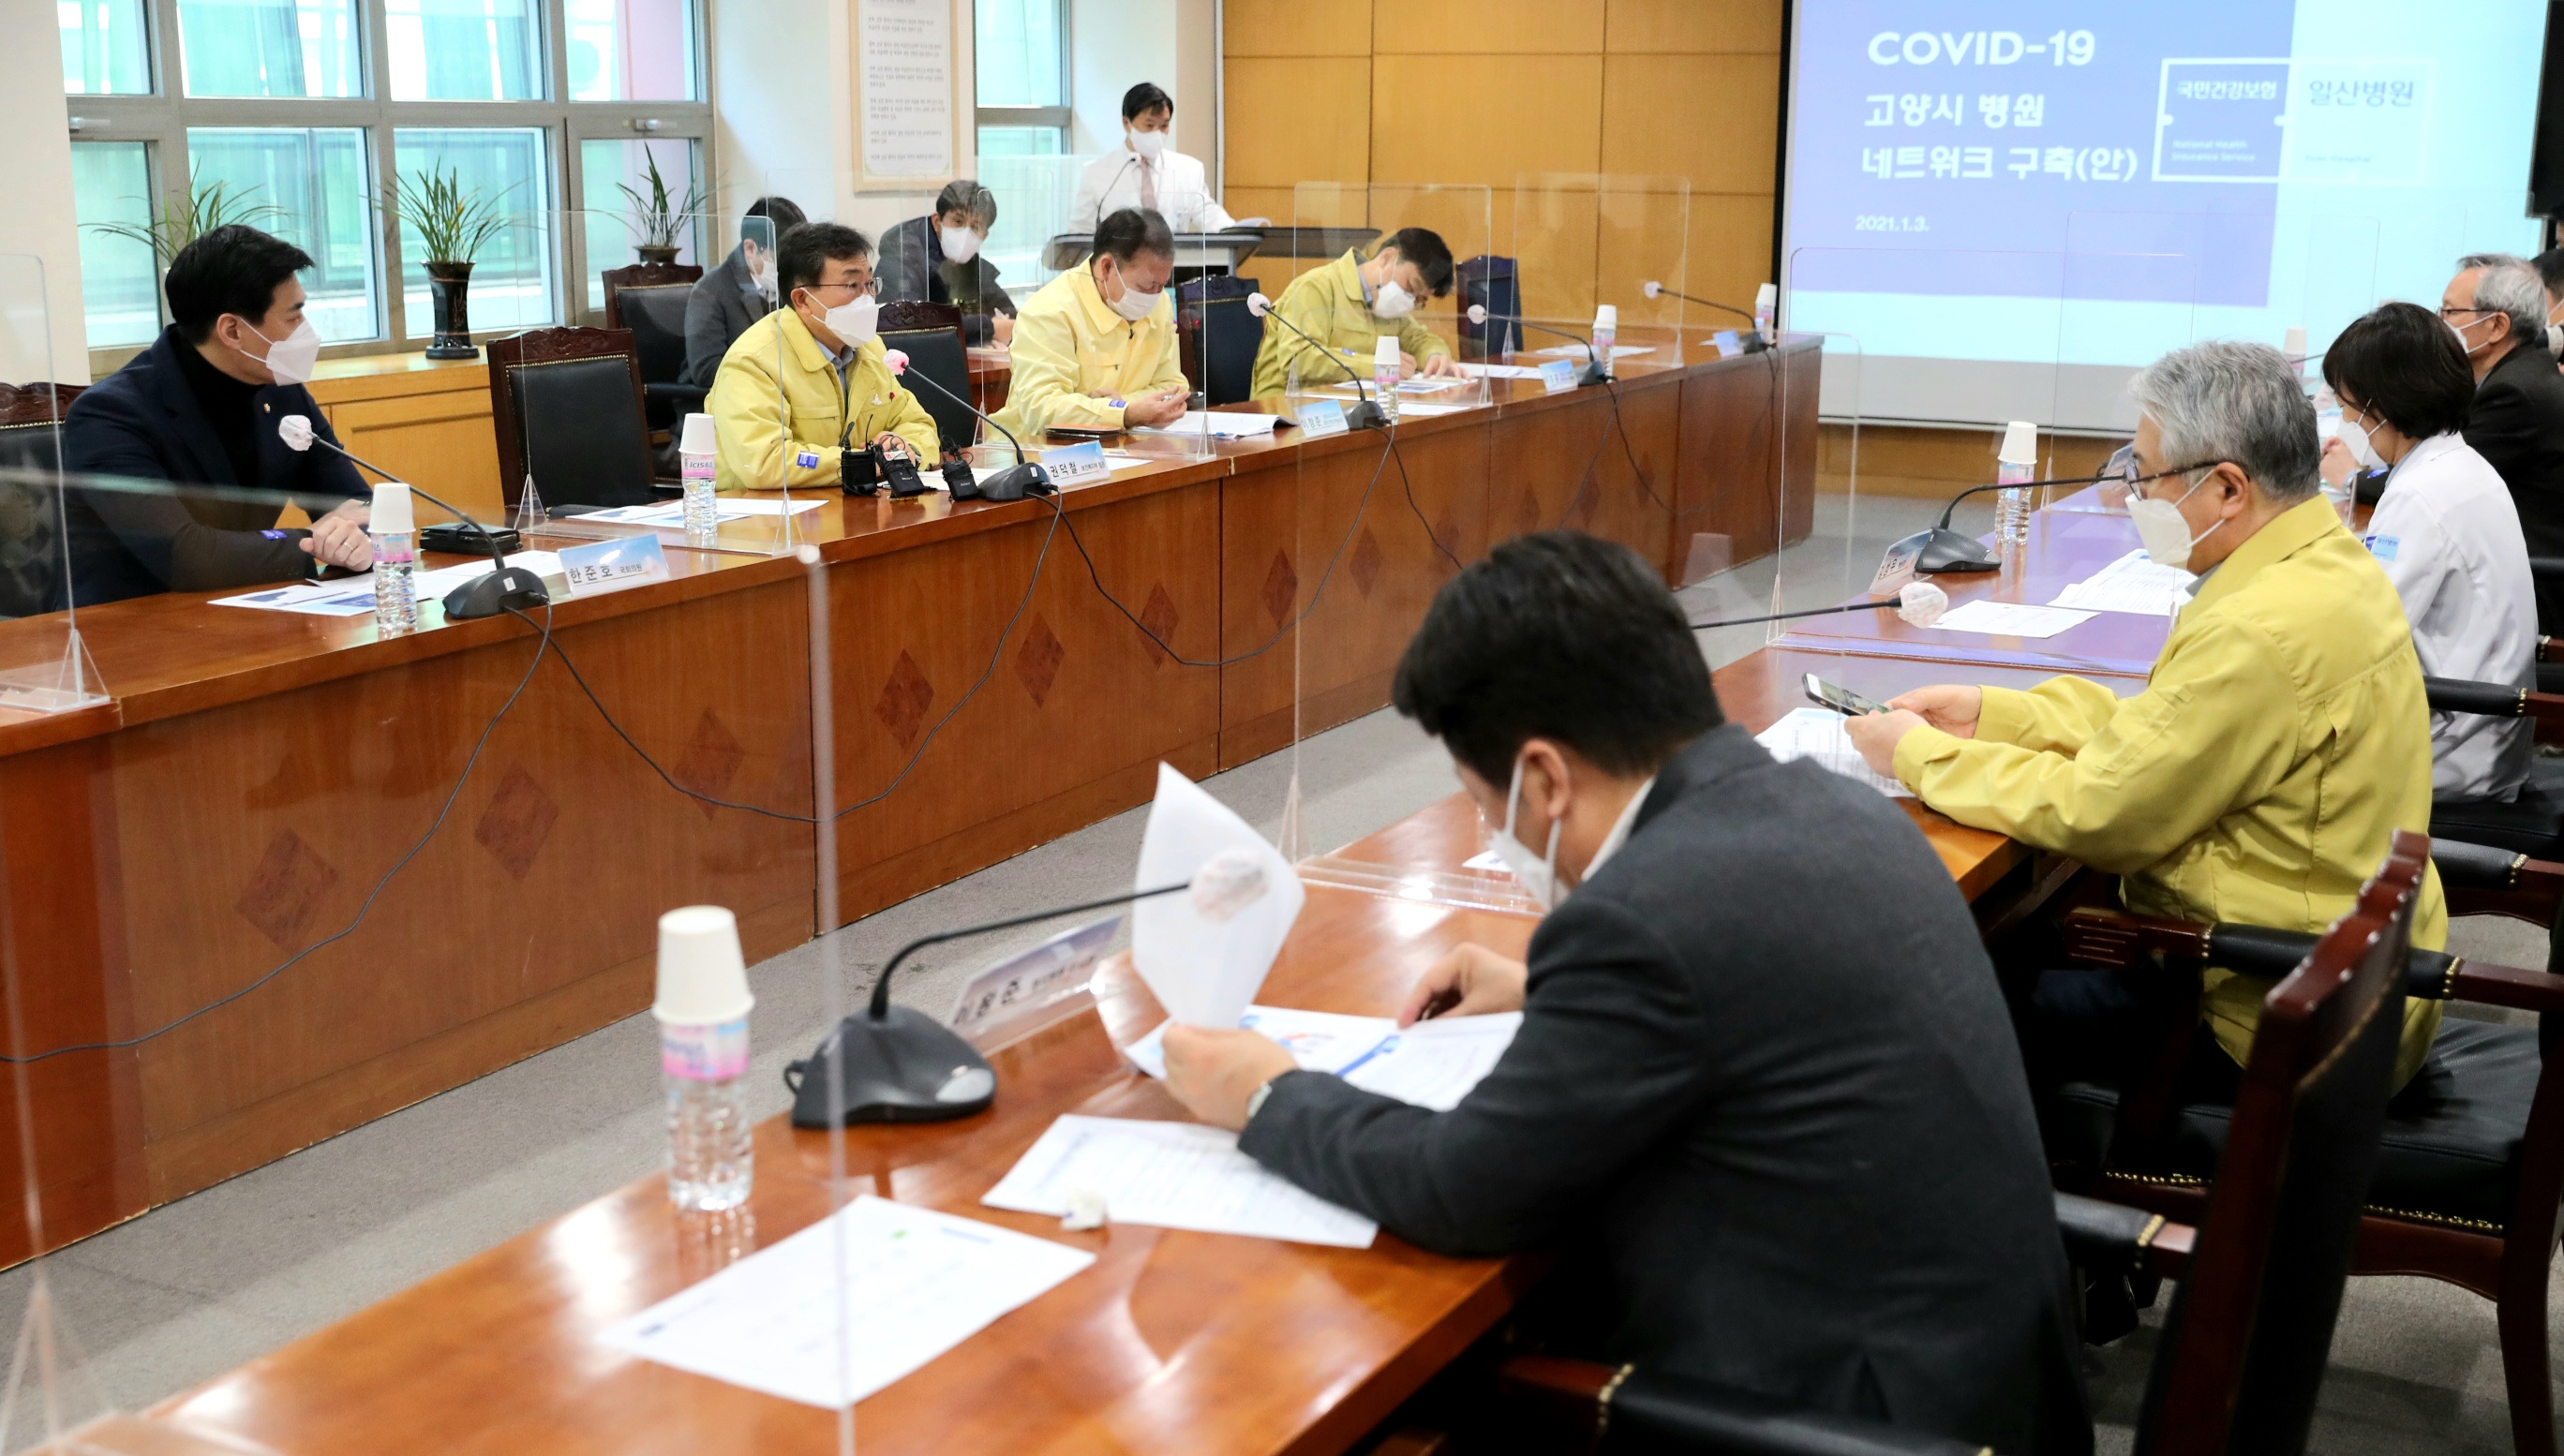 Minister Kwon Checks Hospital Networks in North Gyeonggi for COVID-19 Treatment (January 3) 사진5